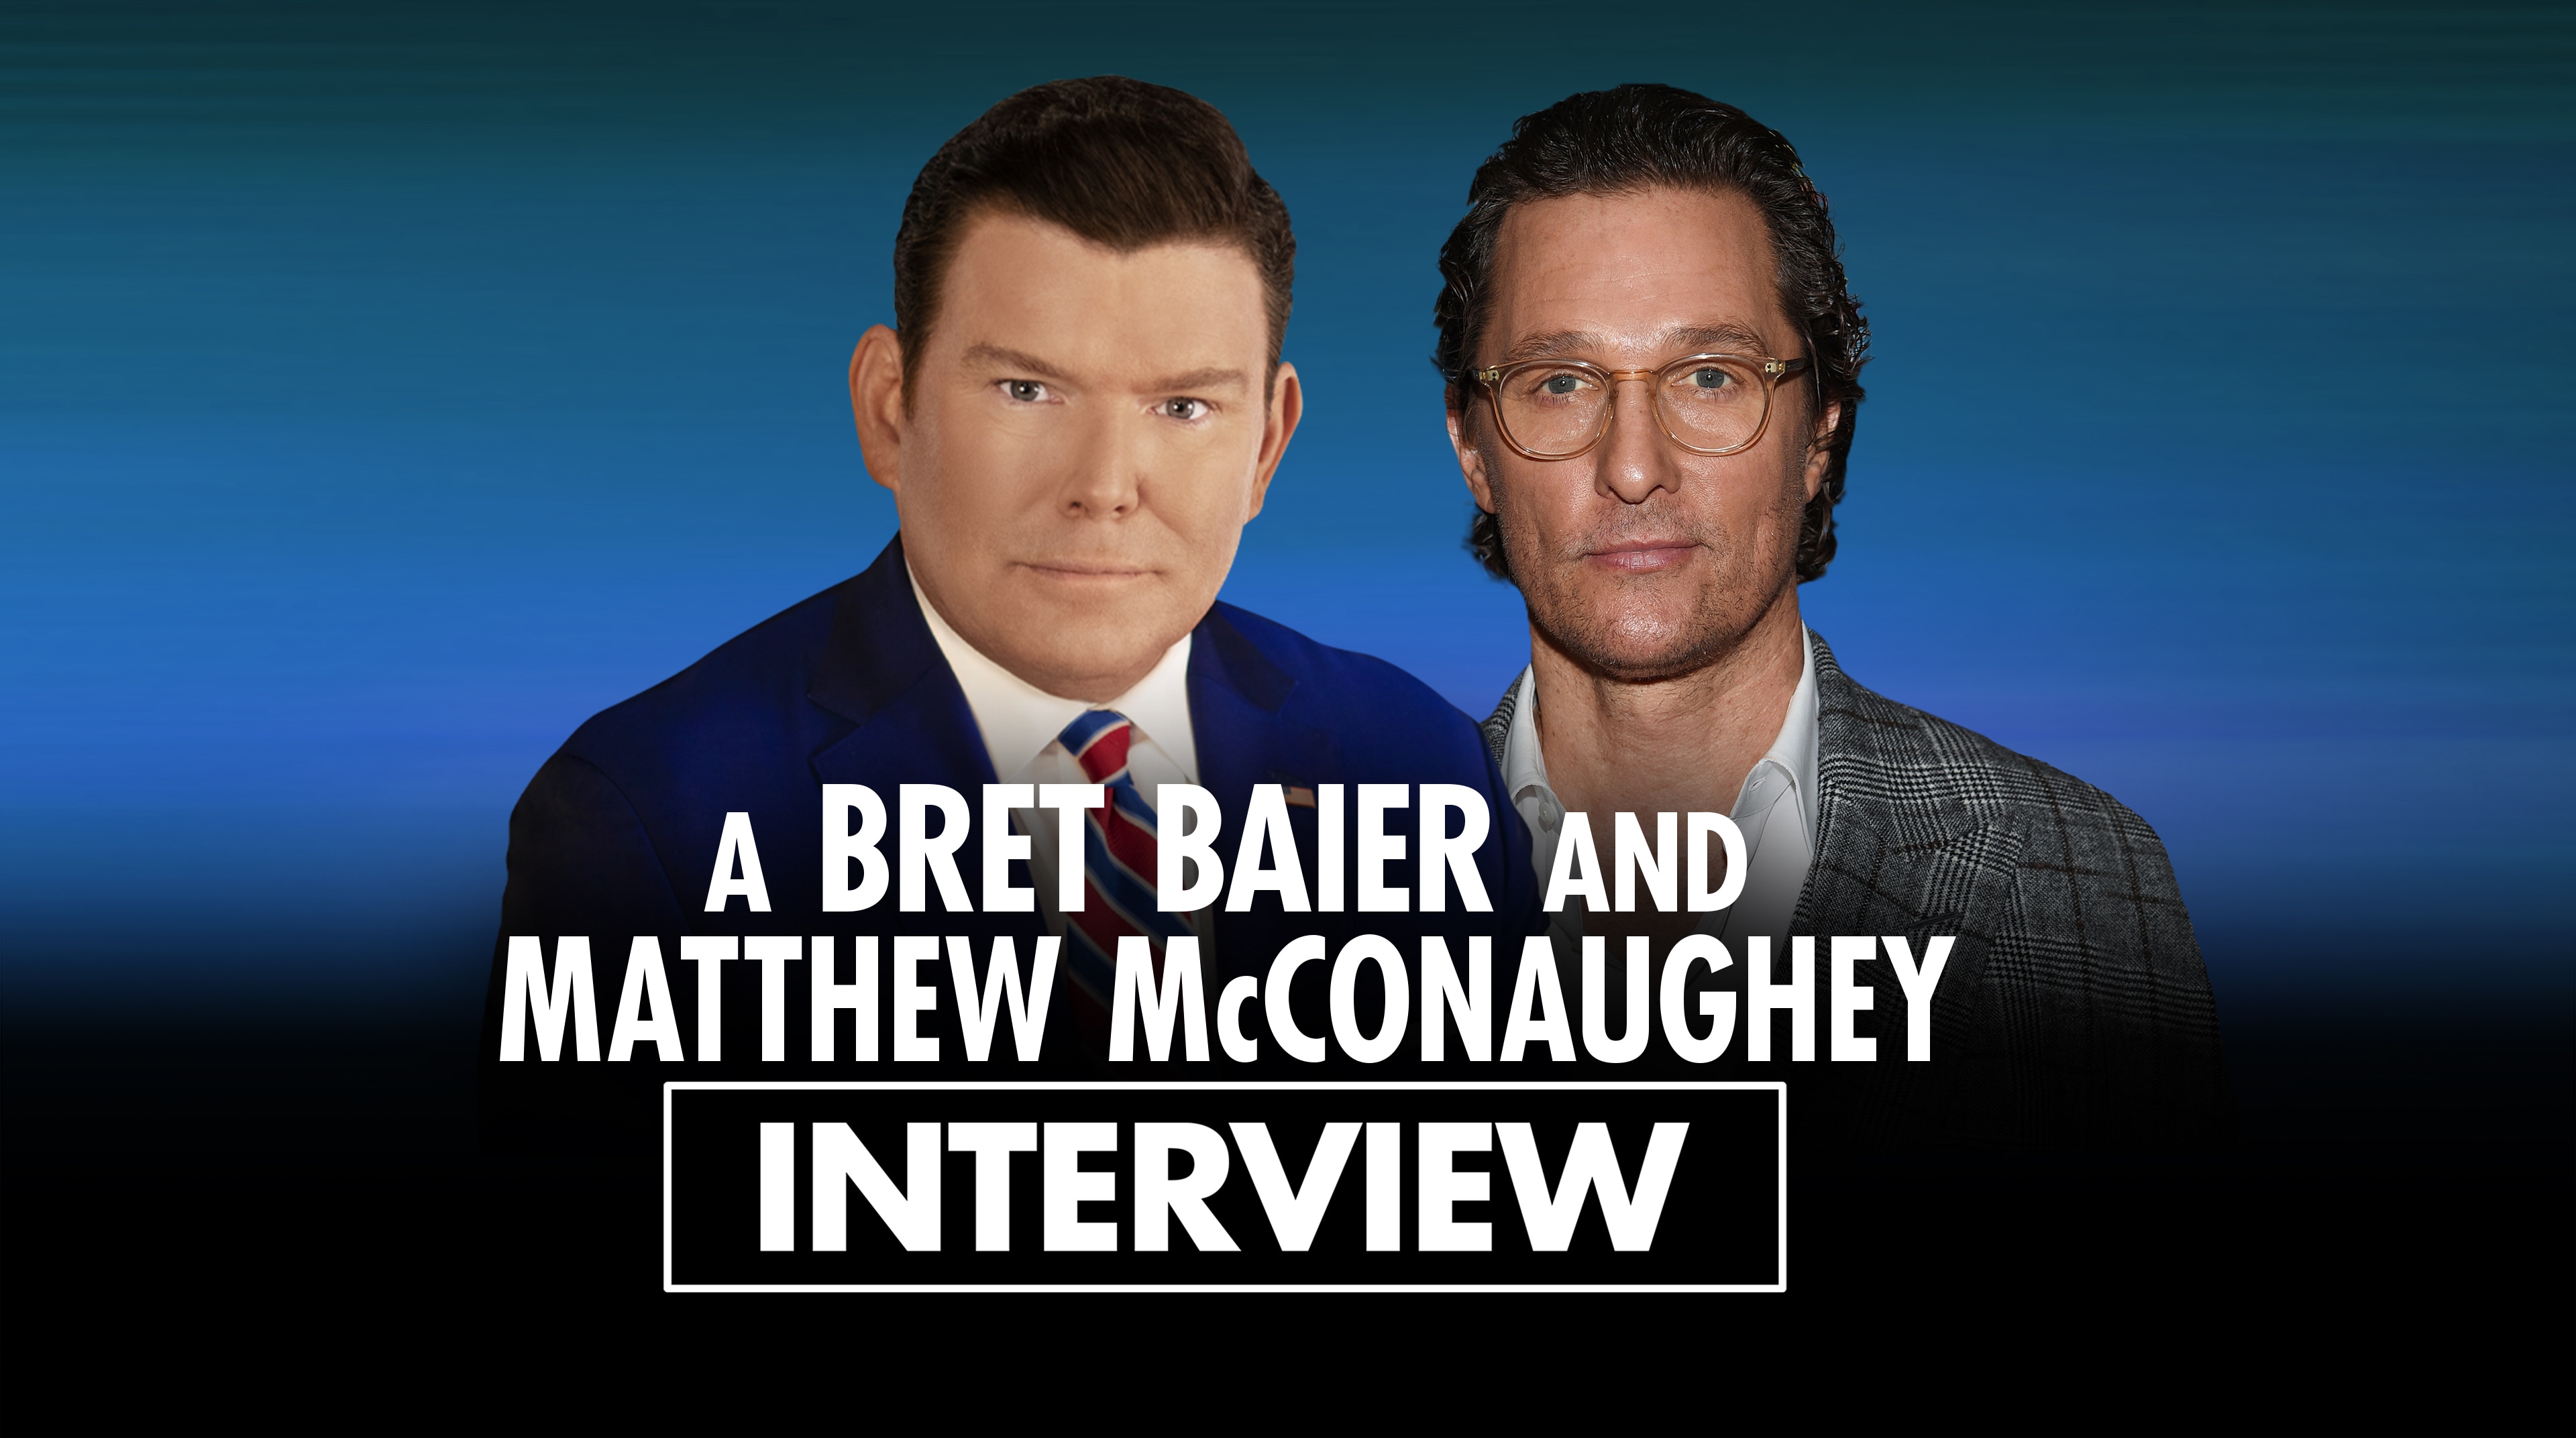 A Bret Baier and Matthew McConaughey Interview